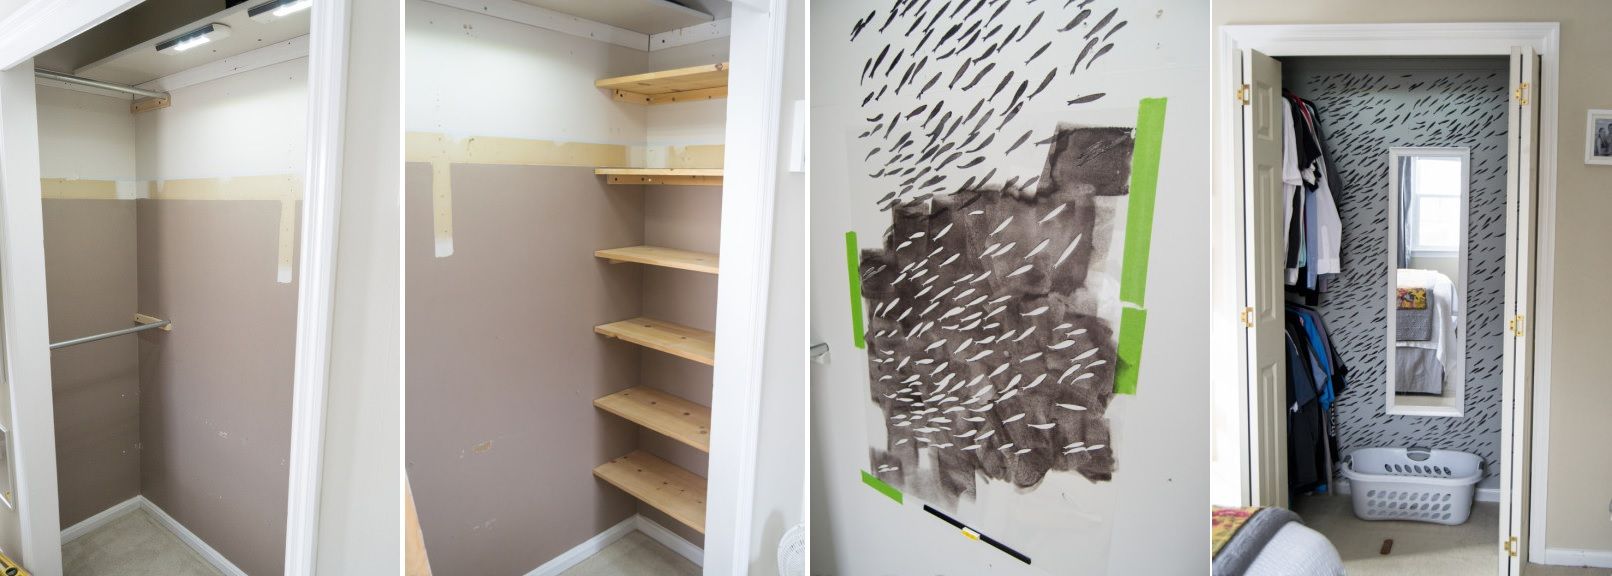 Closet makeover with a stencil paint and reorganization